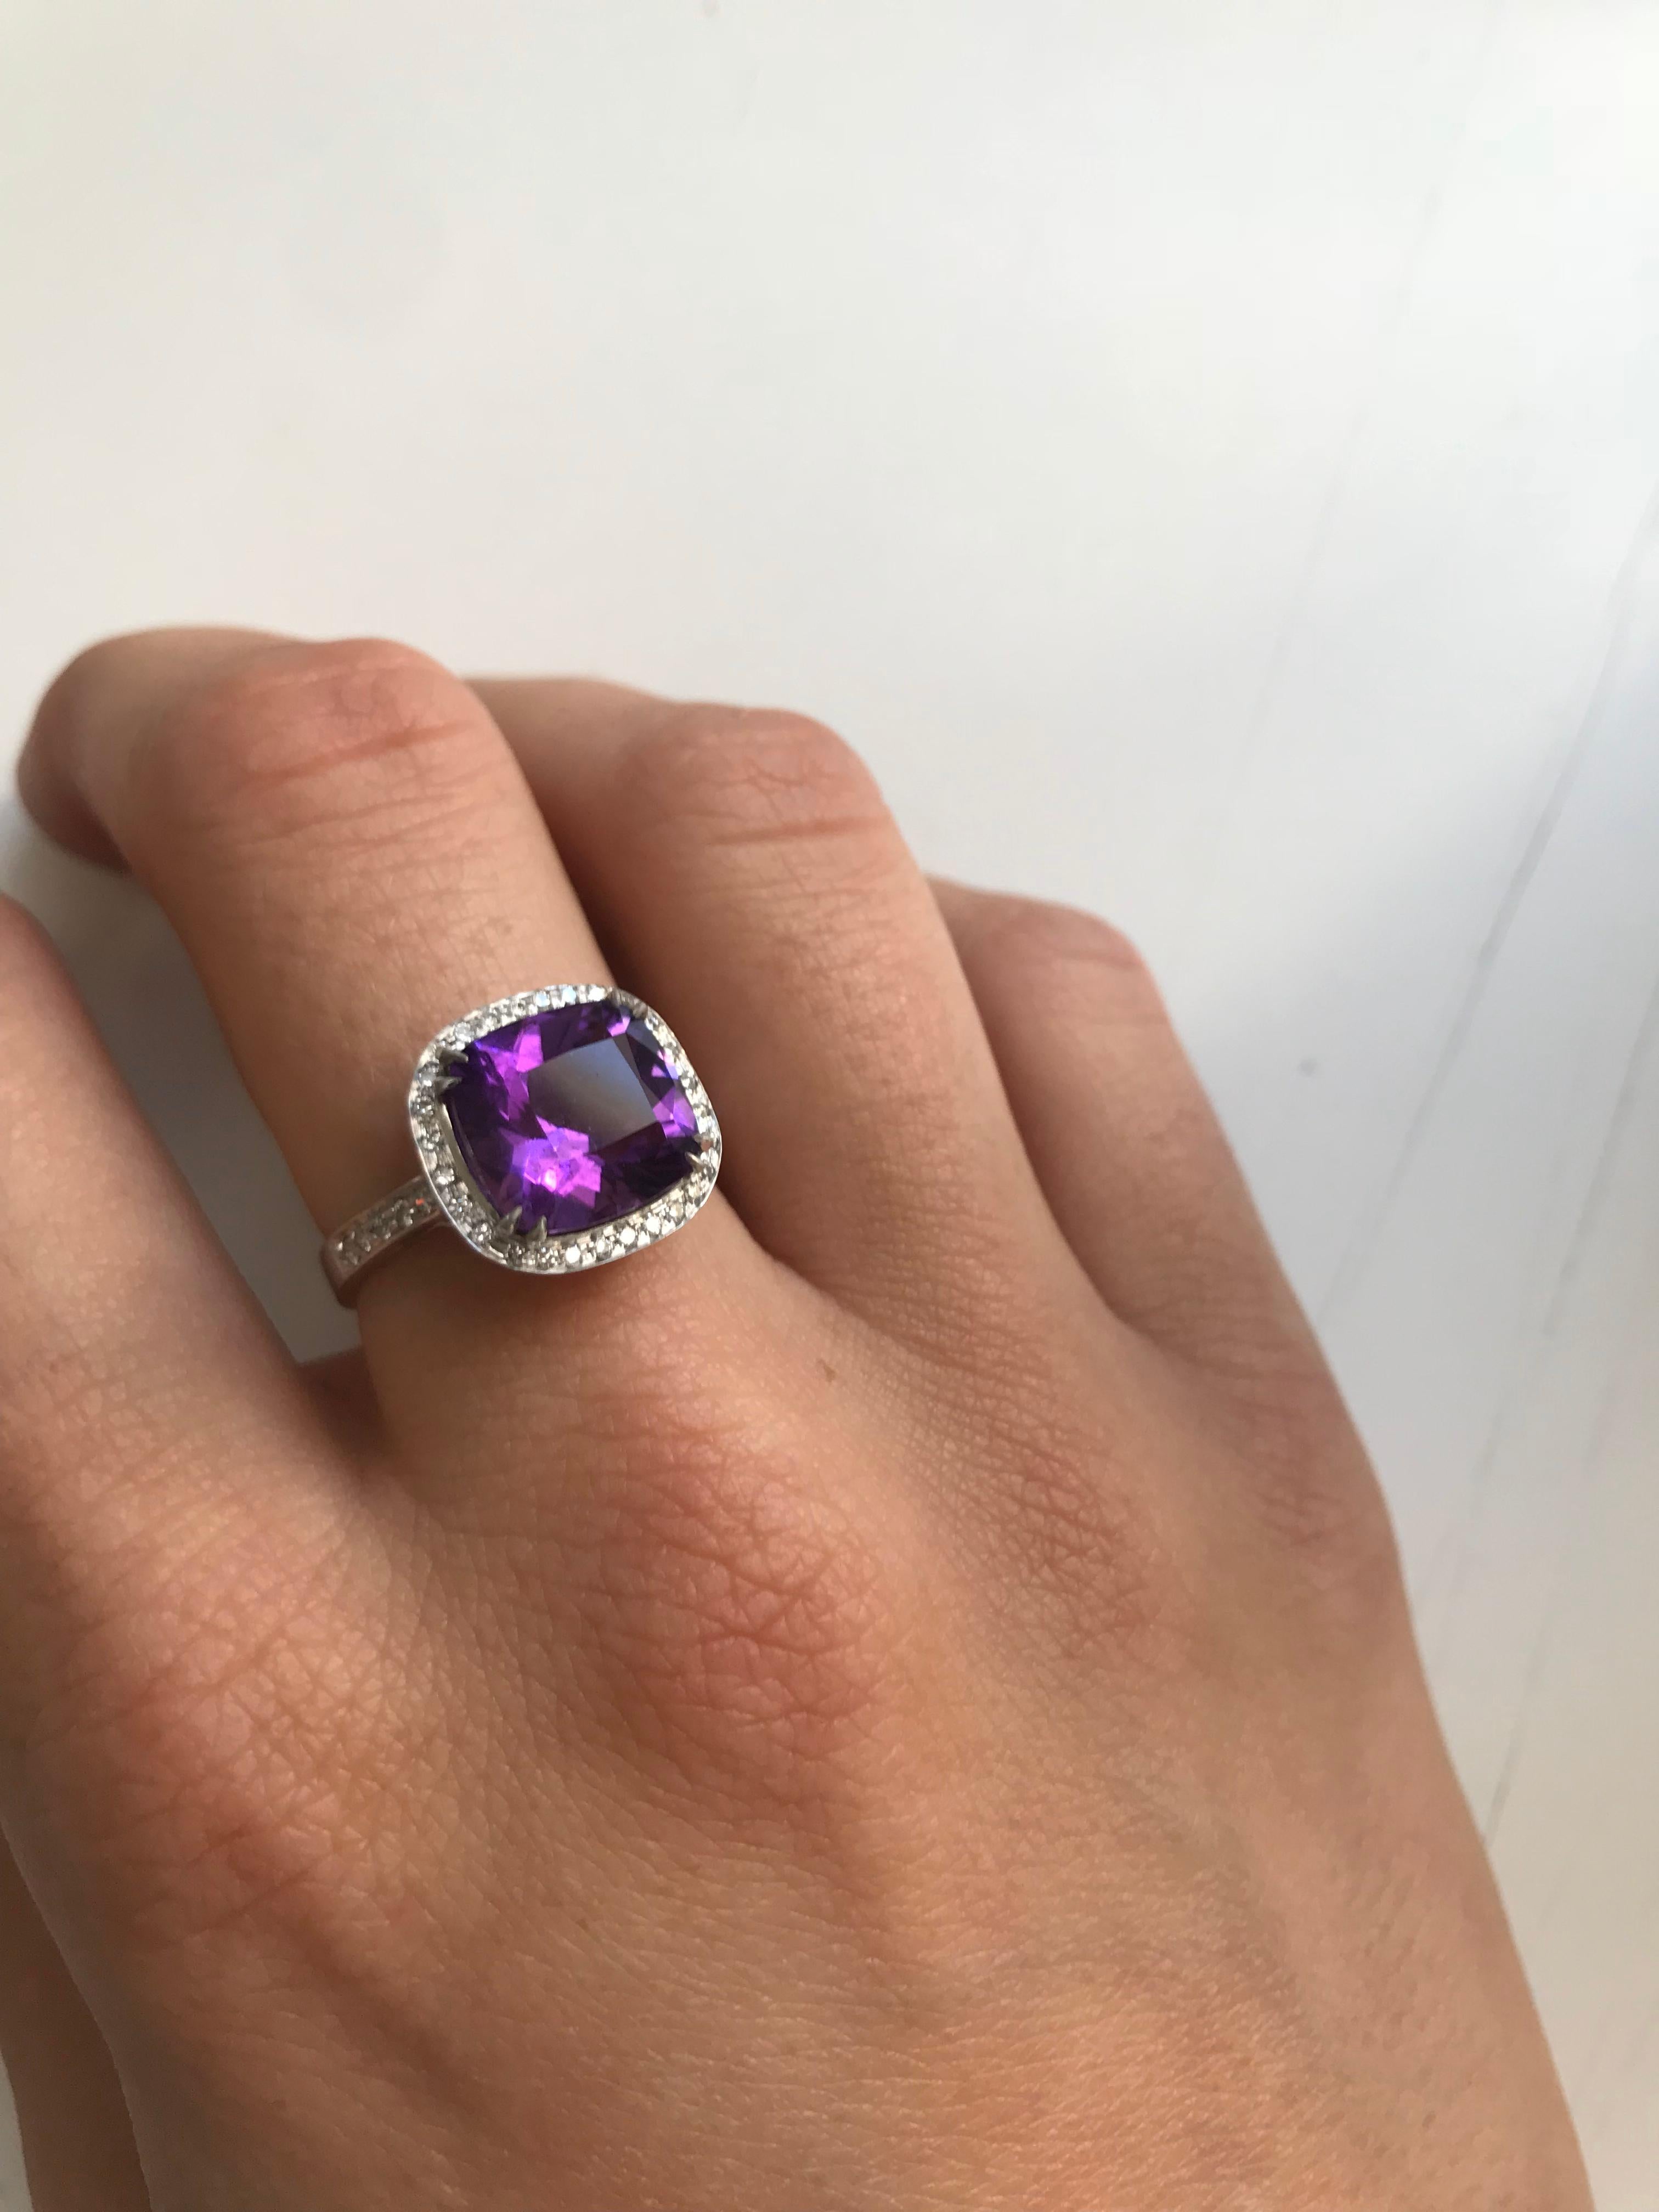 Handmade in our 150 year old Italian Workshop
3.67ct Amethyst
0.35ct White VVS-F Diamonds
18kt White Gold
Size US 7

In true Cocktail Ring style this Hand Cushion Cut Amethyst is surrounded by 28 Brilliant Cut White Diamonds and set in 18k White